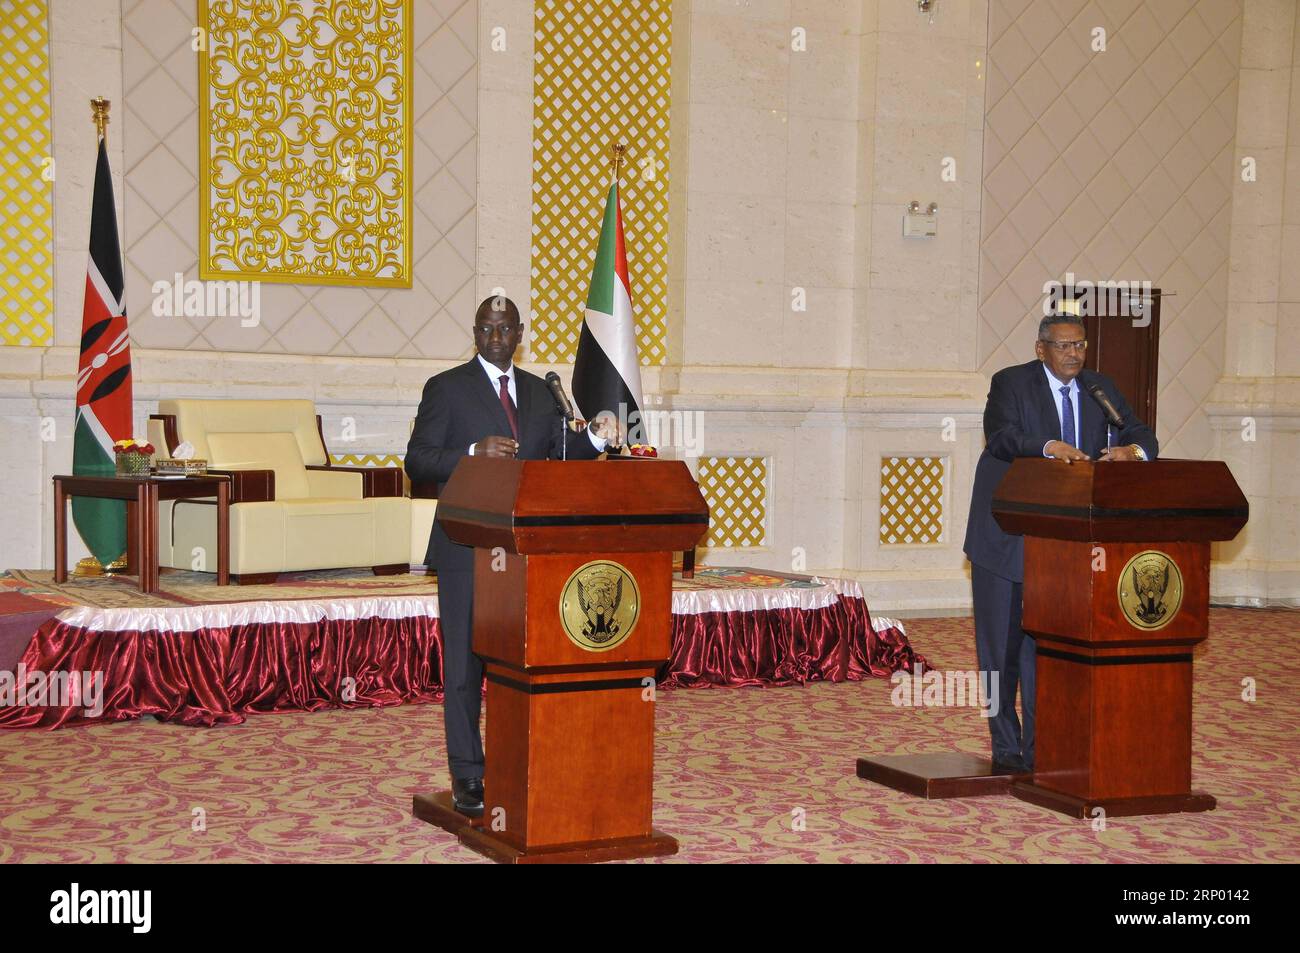 (180411) -- KHARTOUM, April 11, 2018 -- Kenyan Deputy President William Ruto (L) and Sudan s First Vice-President Bakri Hassan Saleh attend a joint press conference in Khartoum, Sudan, April 11, 2018. Sudan and Kenya on Wednesday reiterated their commitment to working together to resolve Africa s security issues, particularly in South Sudan. The announcement came in a communique during the joint talks chaired by Sudan s First Vice-President Bakri Hassan Saleh and visiting Kenyan Deputy President William Ruto. ) SUDAN-KHARTOUM-KENYA-VISIT-JOINT CONFERENCE MohamedxKhidir PUBLICATIONxNOTxINxCHN Stock Photo